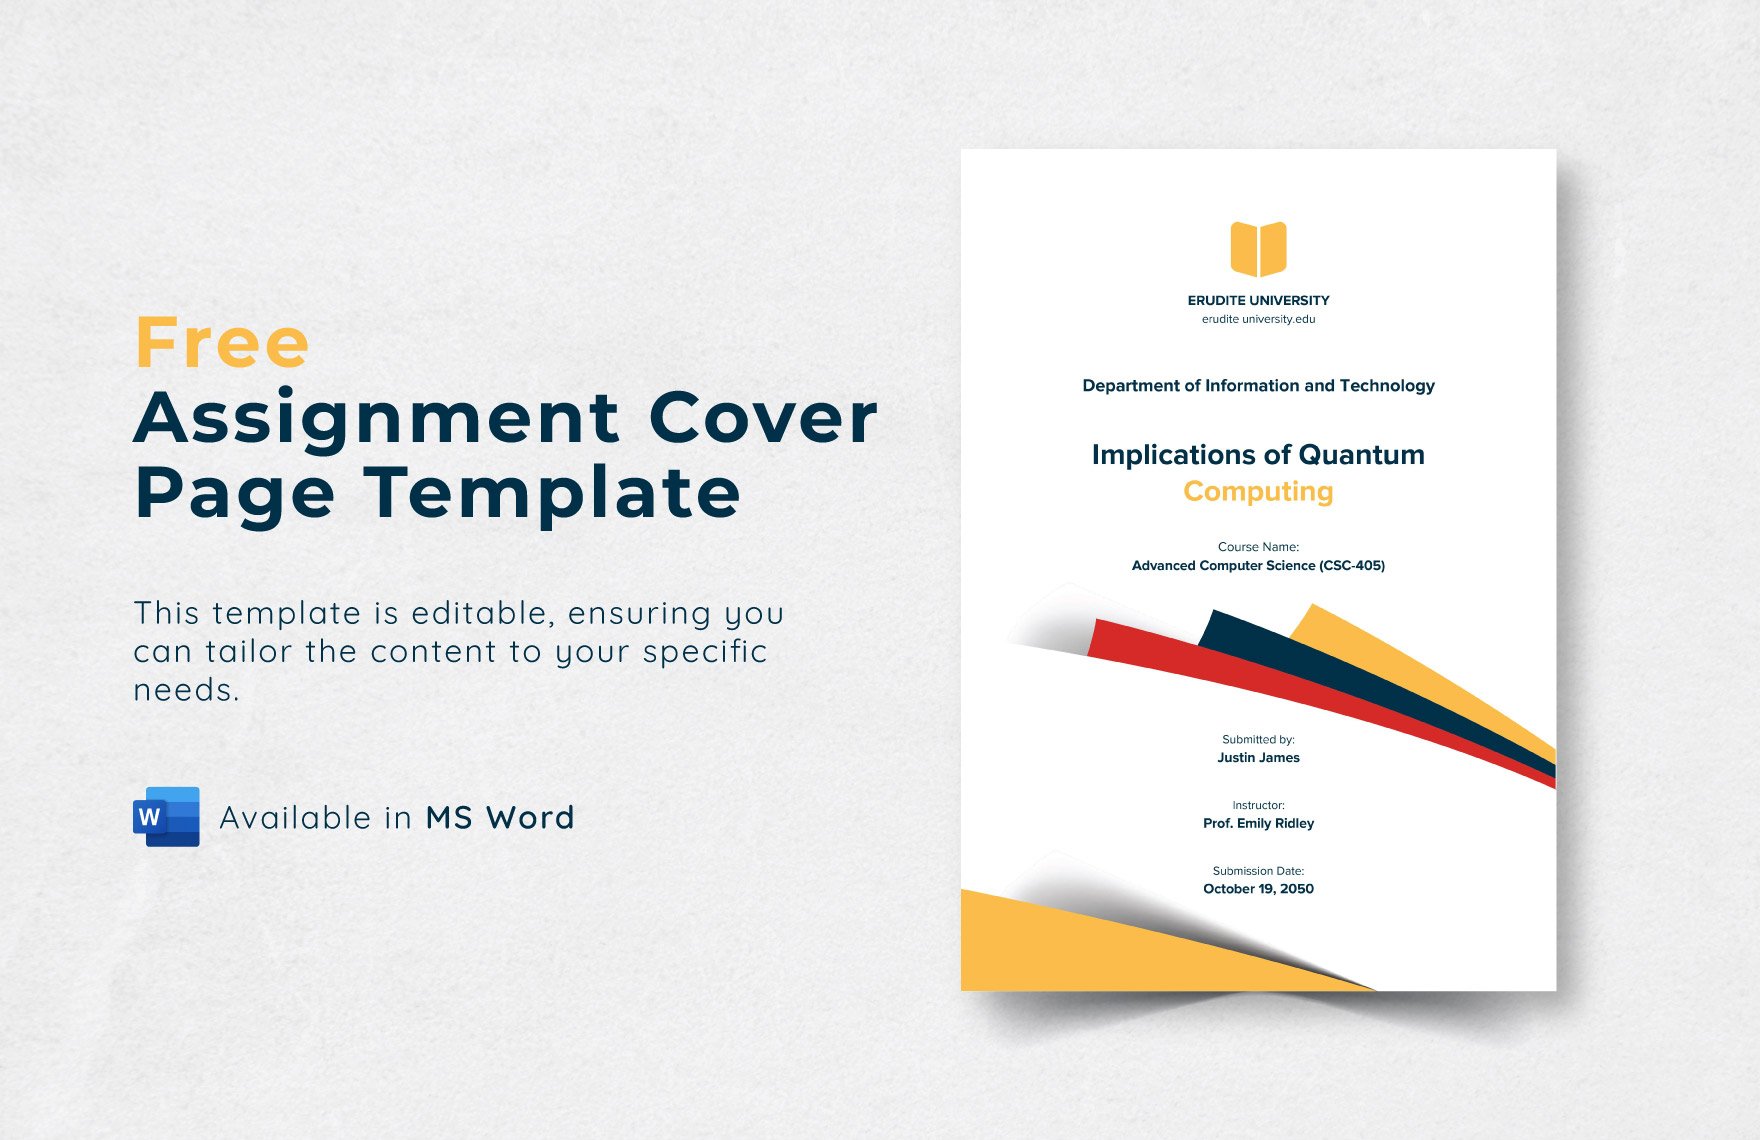 Free Assignment Cover Page Template in Word